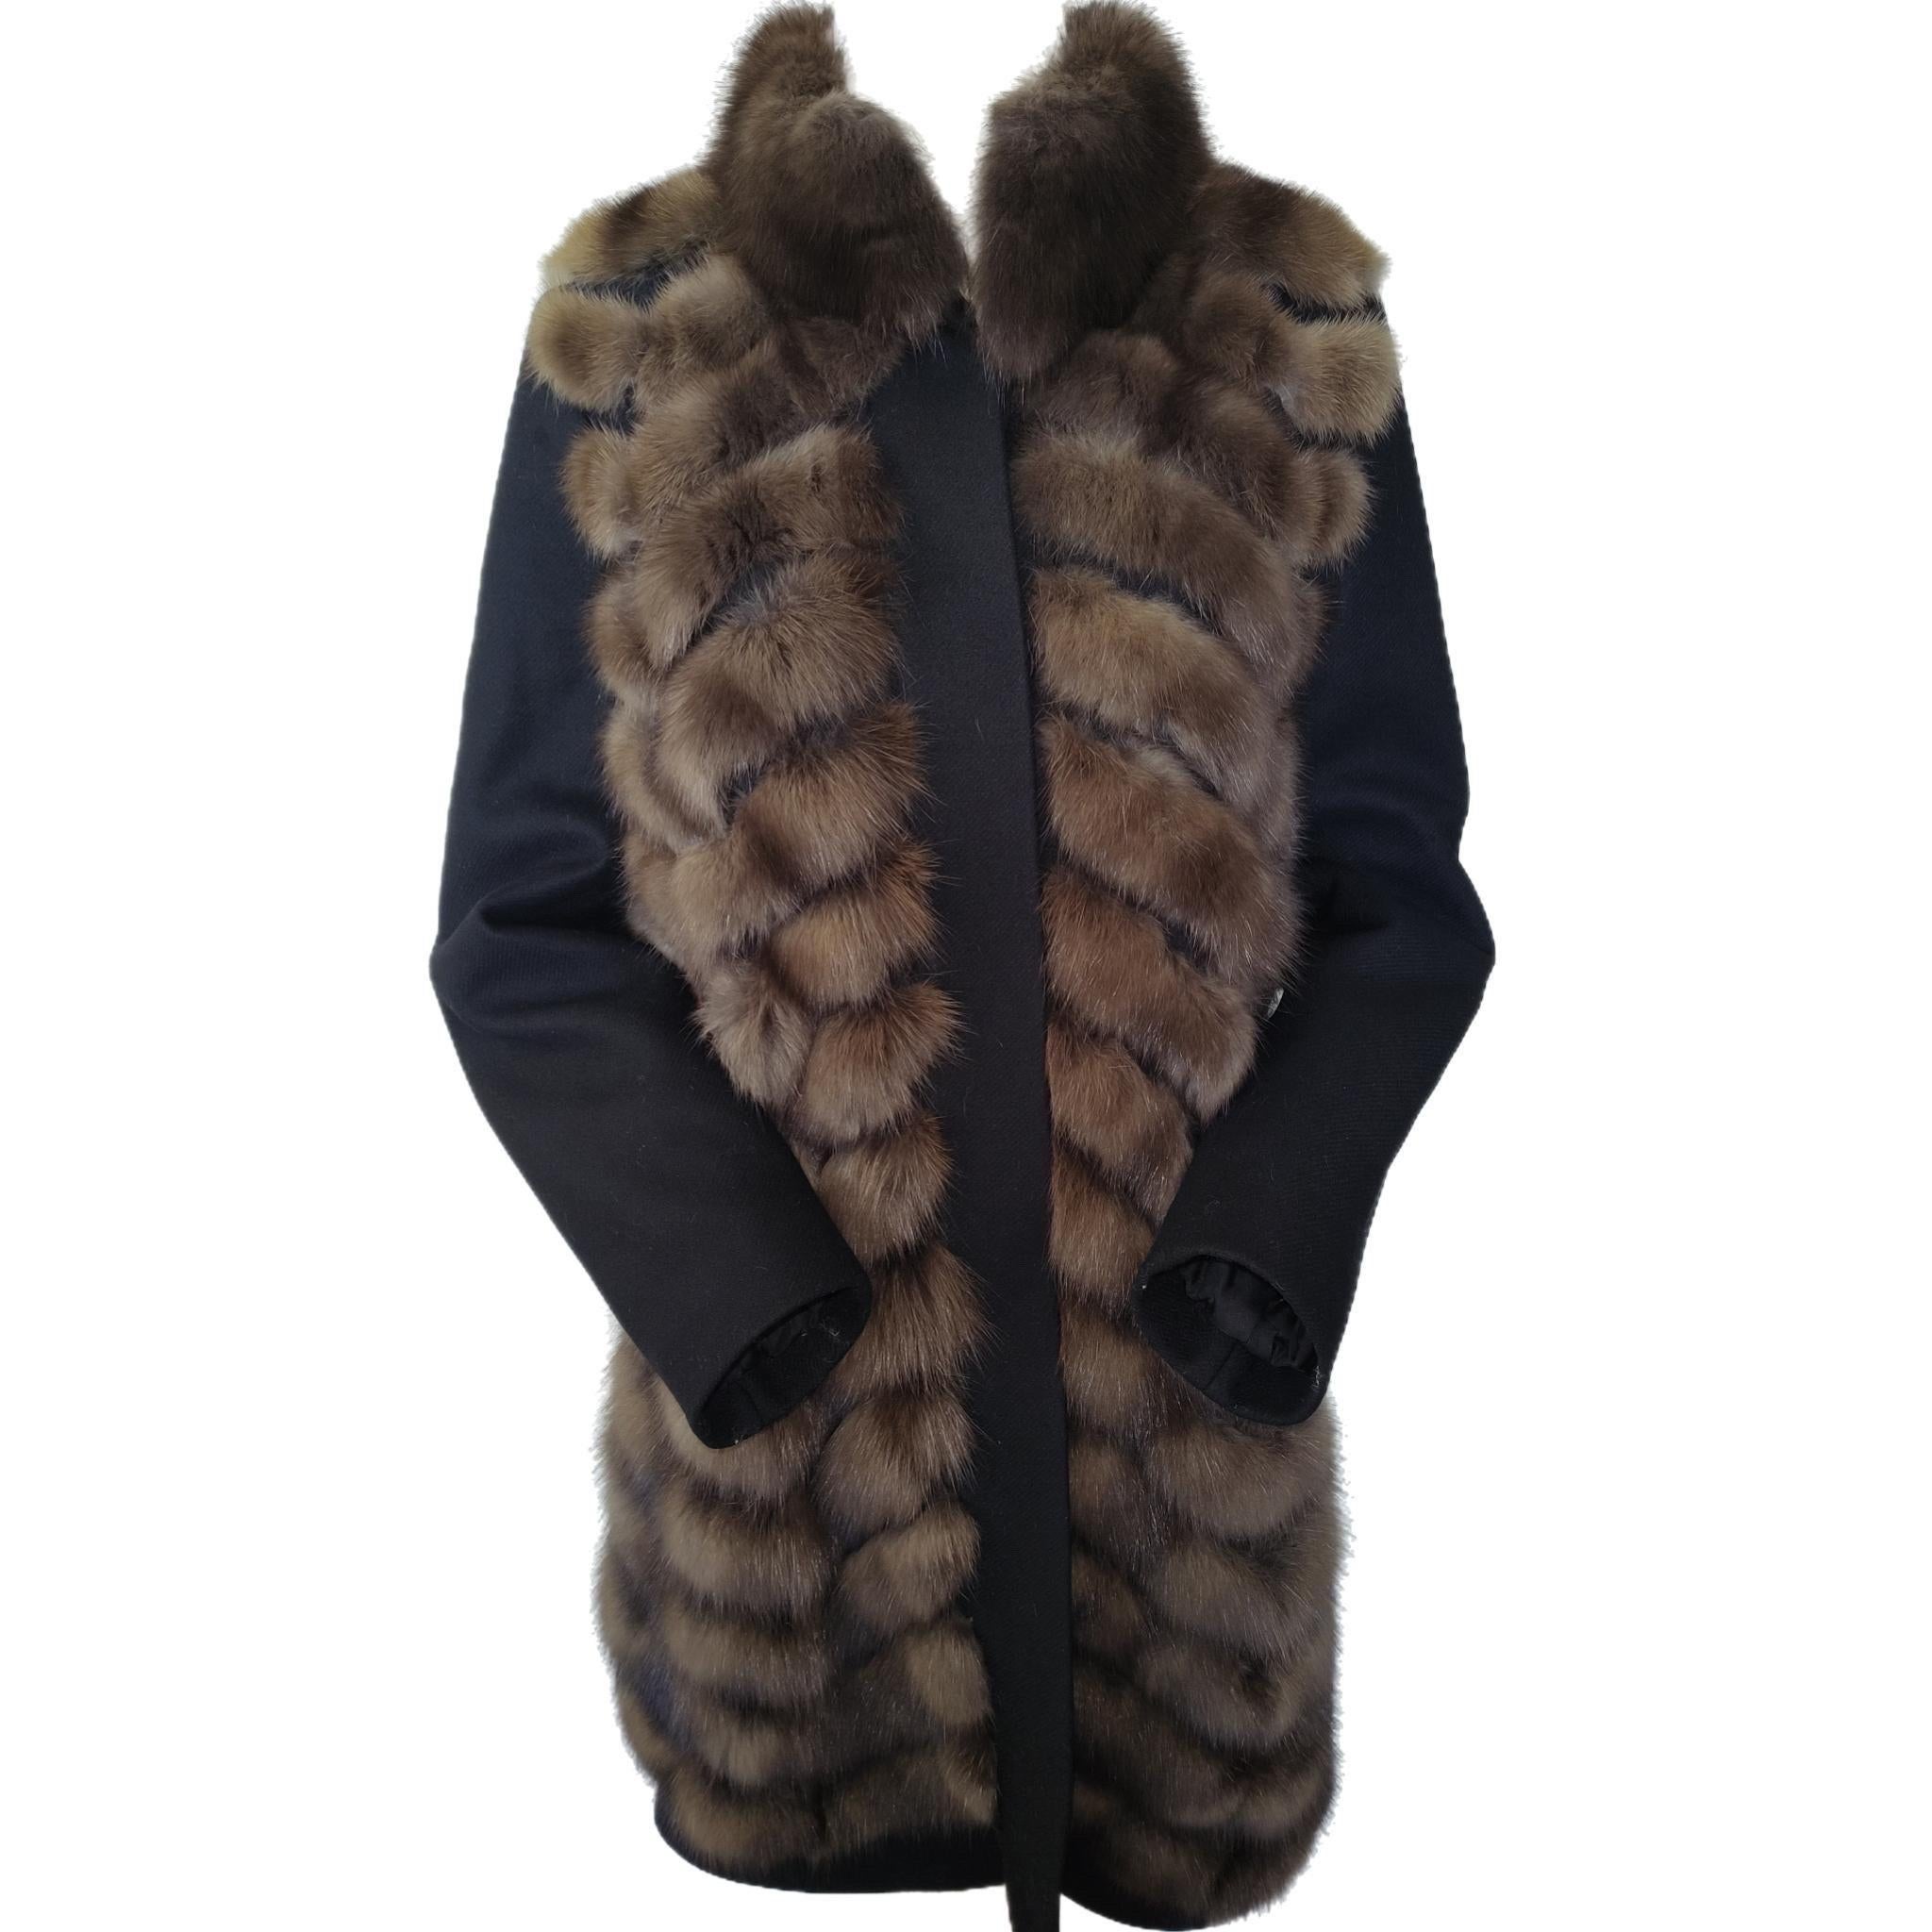 Cashmere Loro Piana with Russian Sable and whole skins. Also this sable Fur, as the most part of the collection, is made using selected the best quality of sable carefully chosen by our laboratories. The type of sable fur used for this coat is